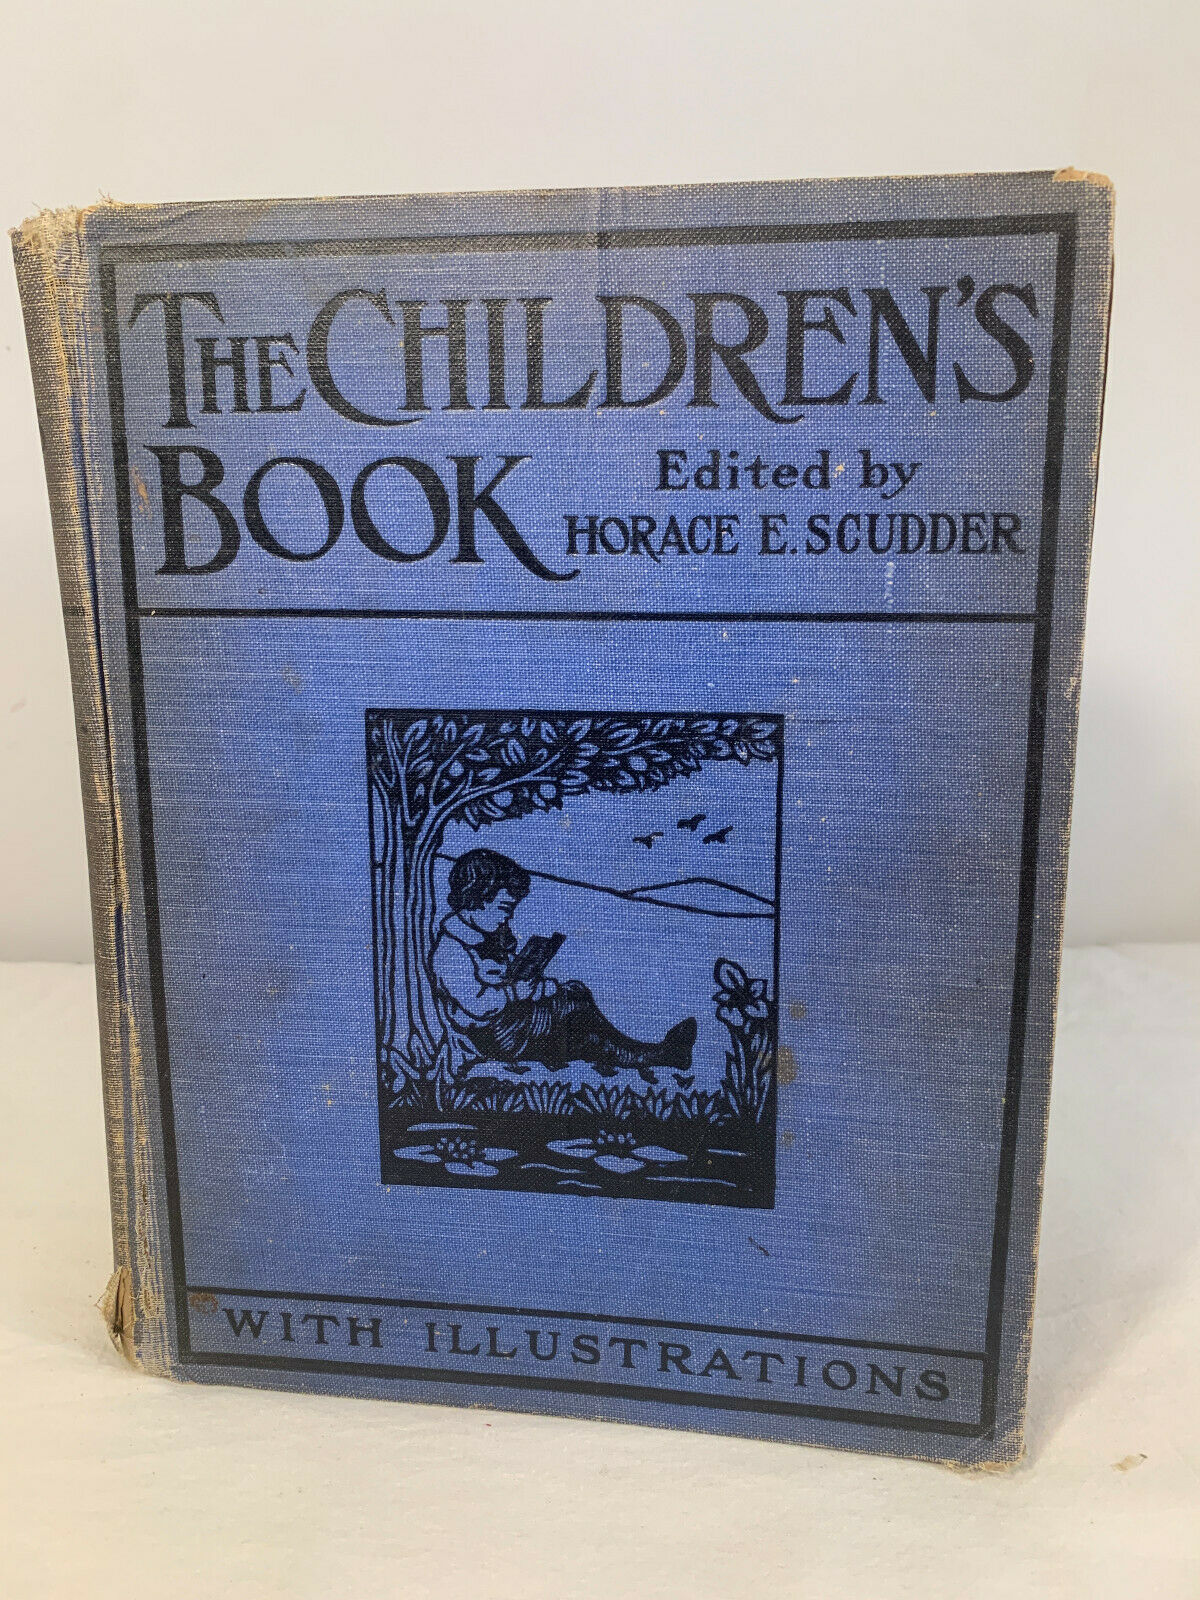 The Children's Book edited by Horace E. Scudder [1909]